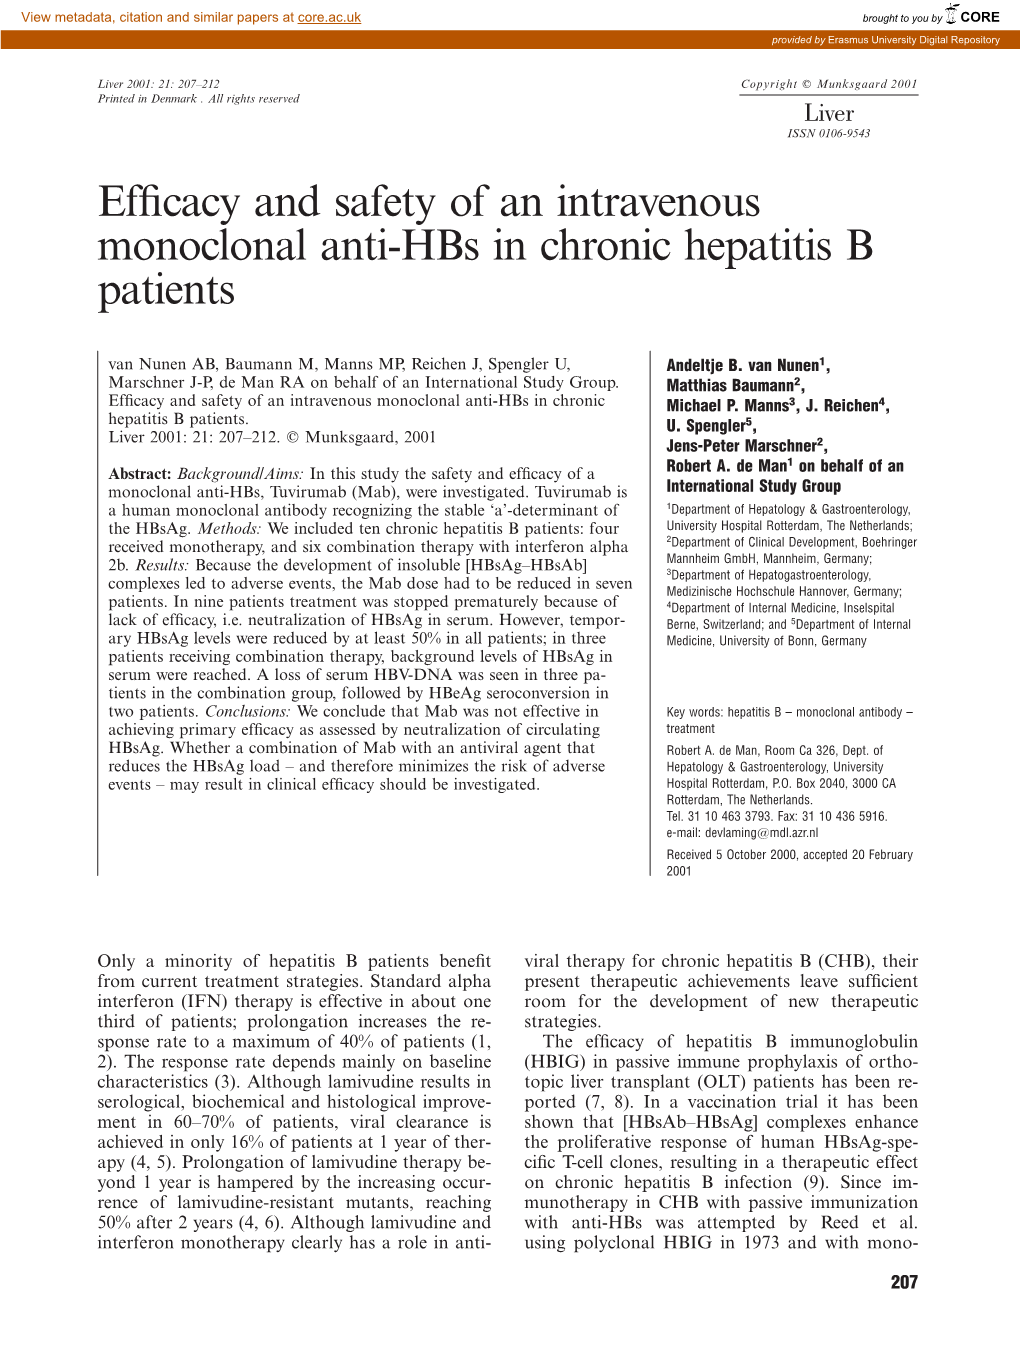 Efficacy and Safety of an Intravenous Monoclonal Anti-Hbs in Chronic